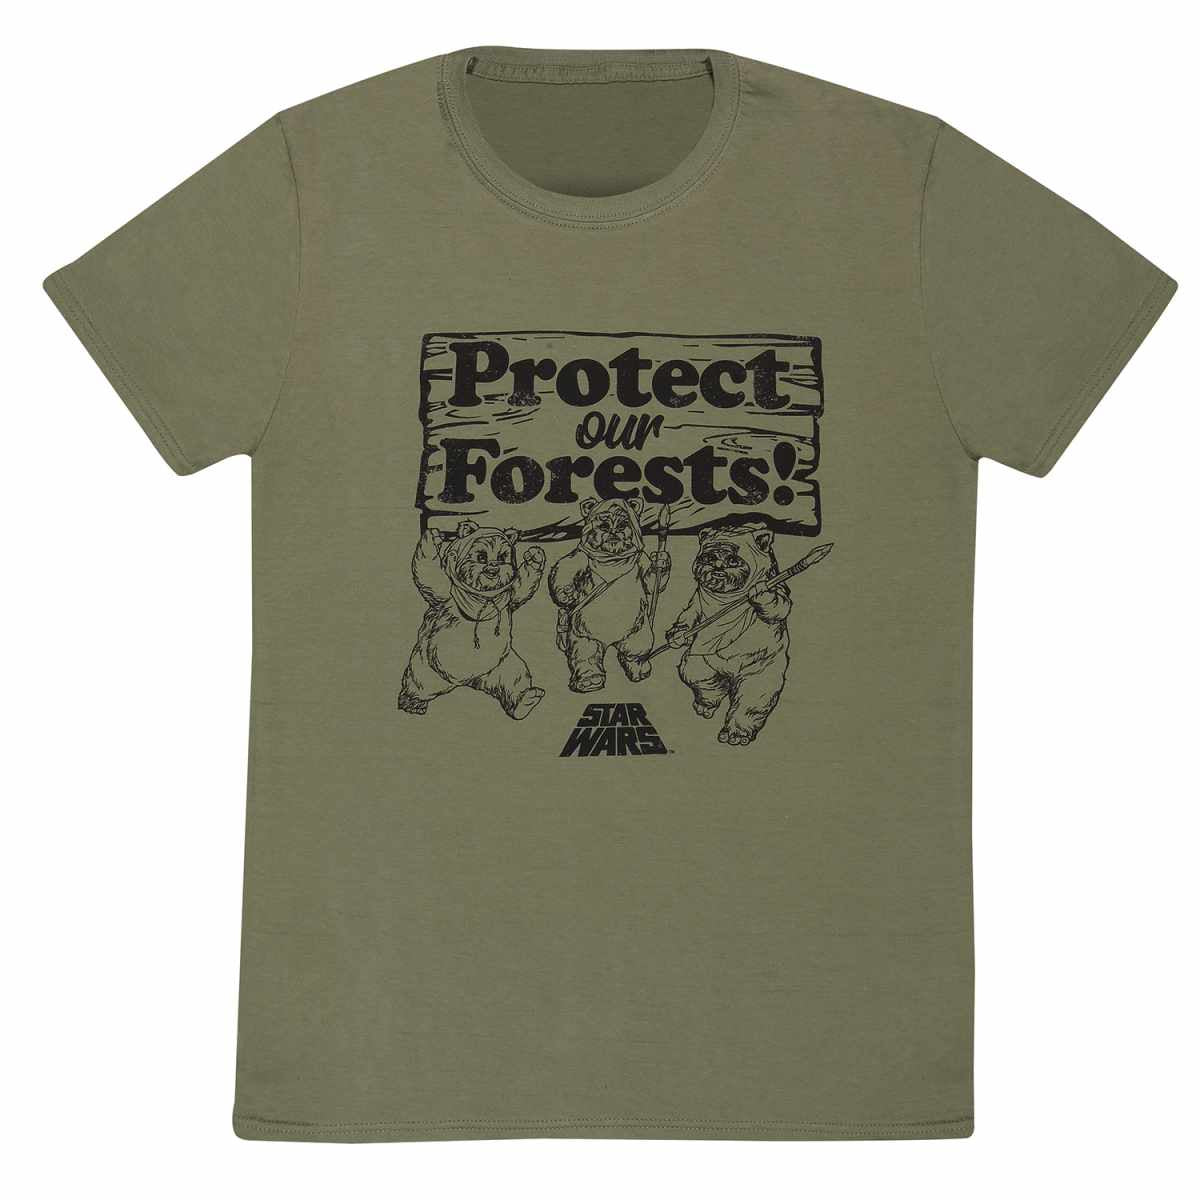 STAR WARS - Protect Our Forests T-Shirt